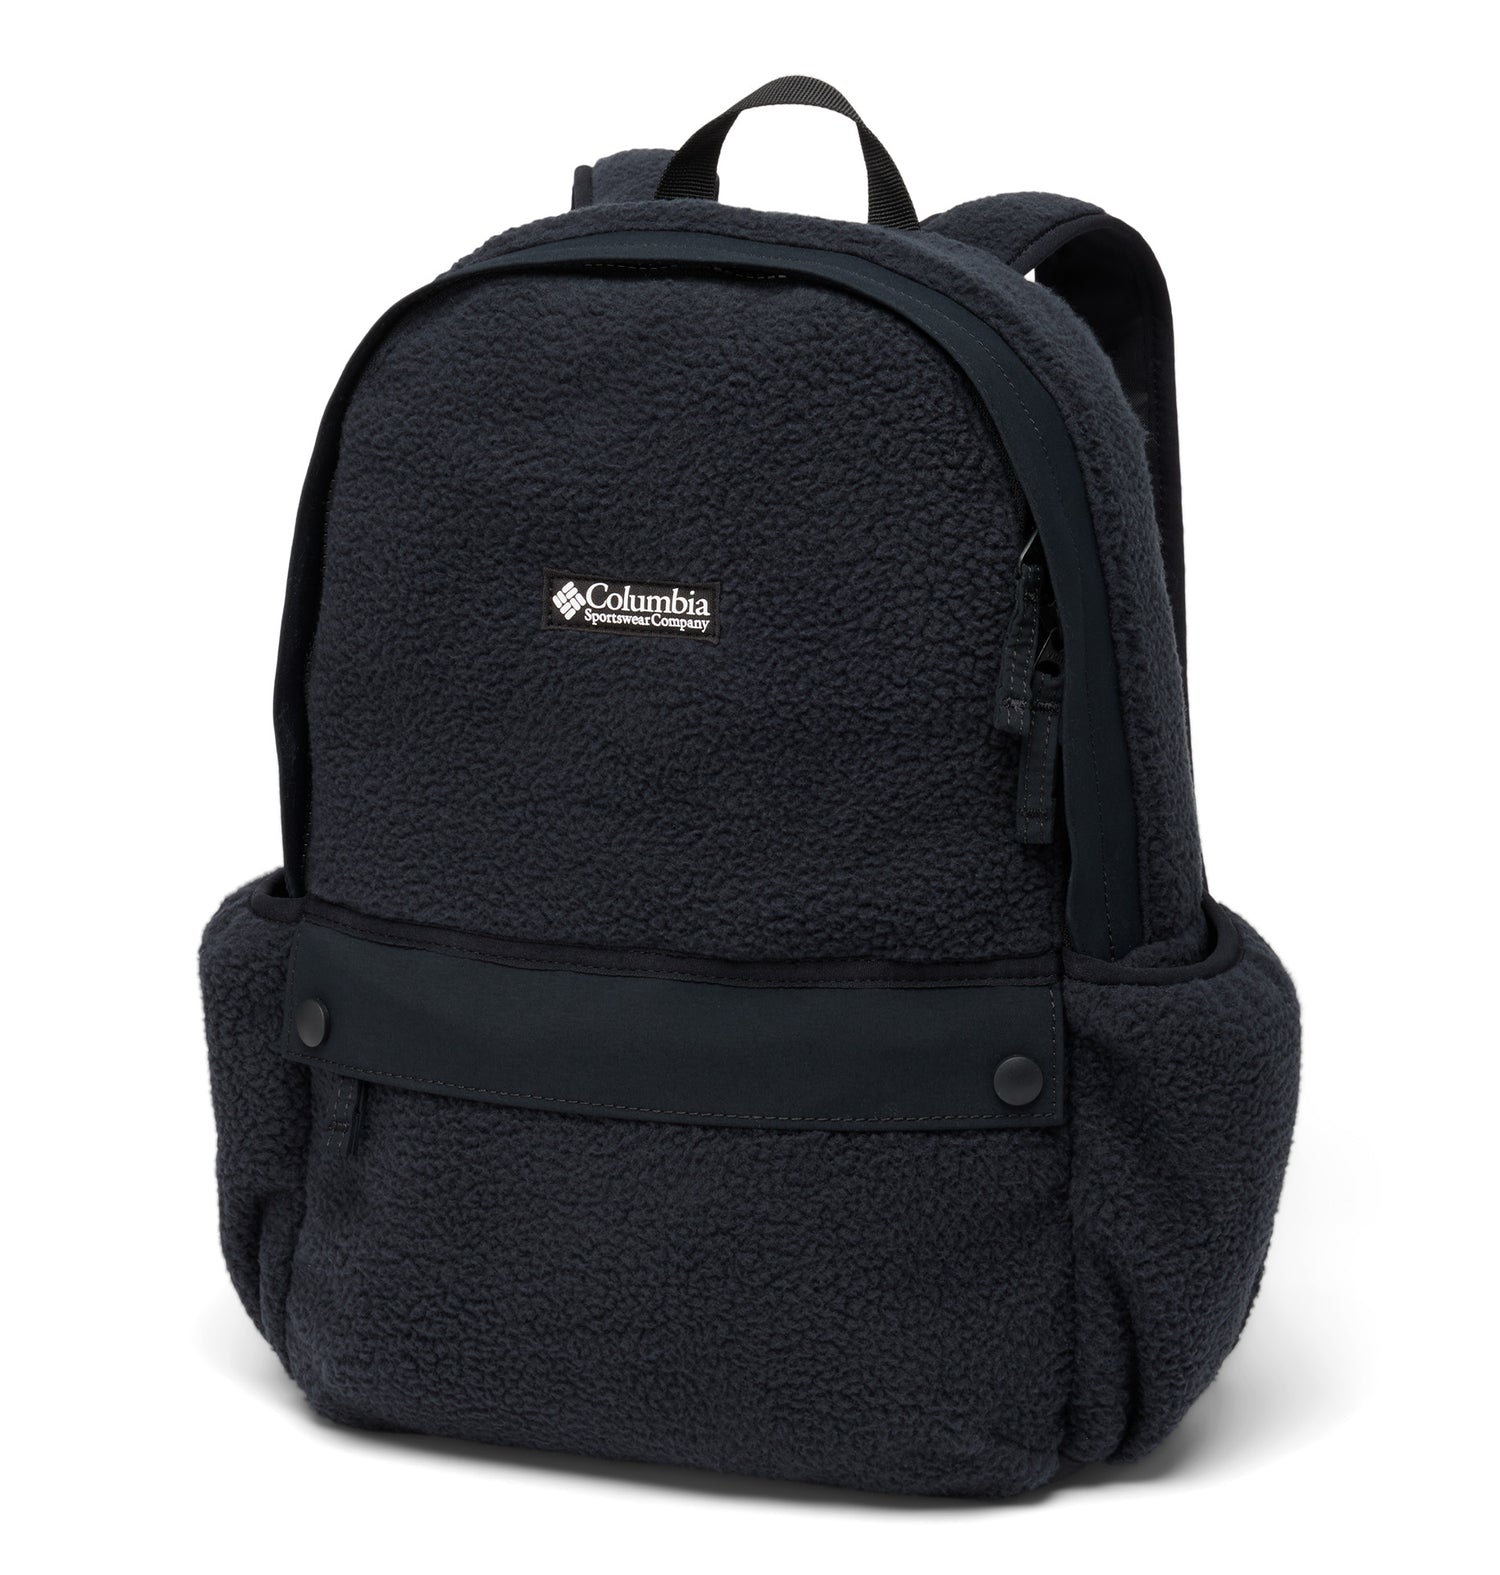 Front side of a black backpack called Helvetia designed by Columbia showing its fleece teture, logo printed on the front compartment, and 2 snap-button opening to a front pocket.